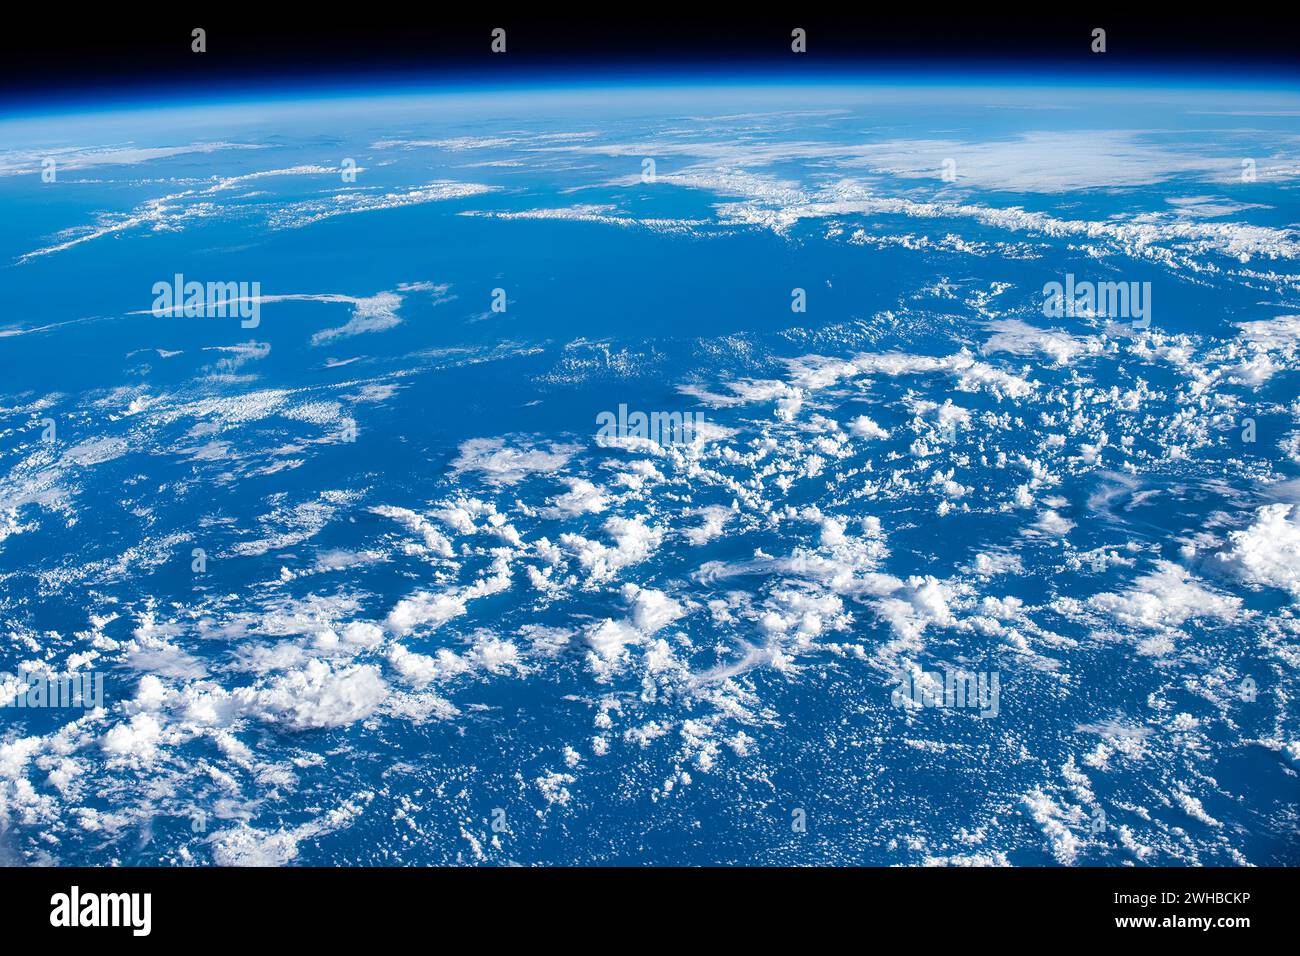 Cloudscape over planet Earth Stock Photo